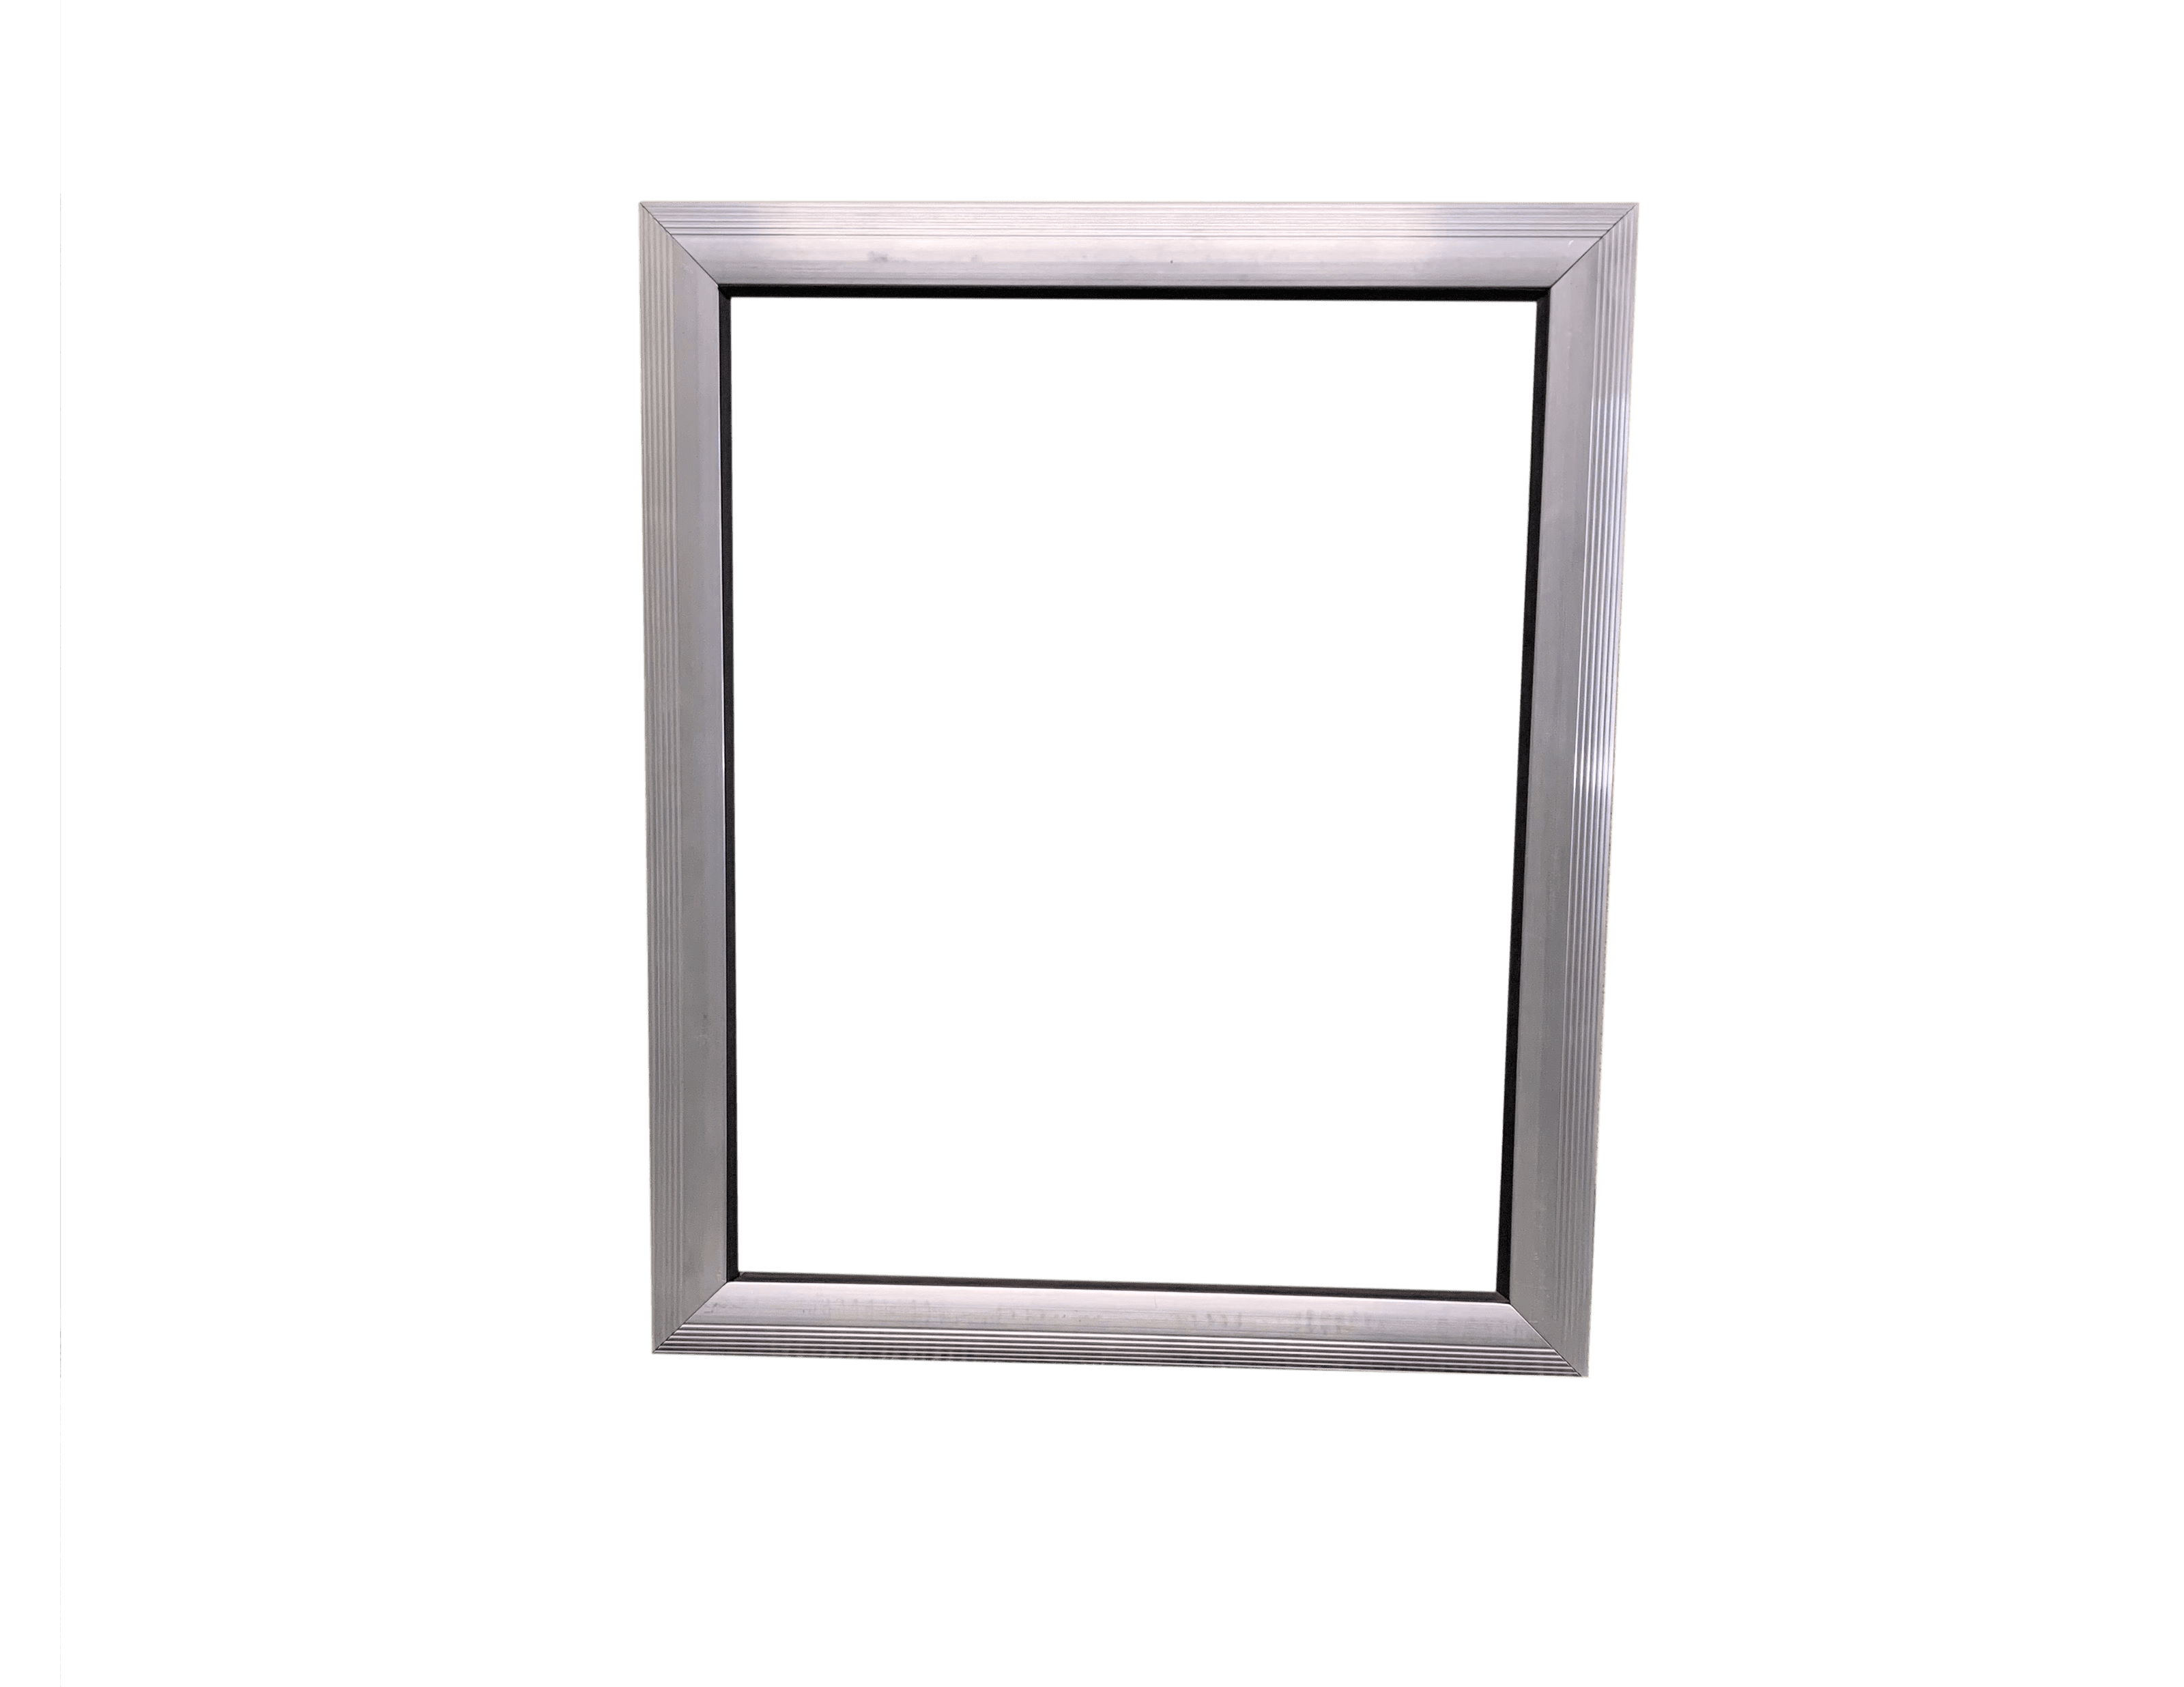 Saginaw Control SCE-AW2016SG Viewing Window - Extruded Aluminum Safety Glass, Height:24.00", Width:20.00", Depth:0.98", 